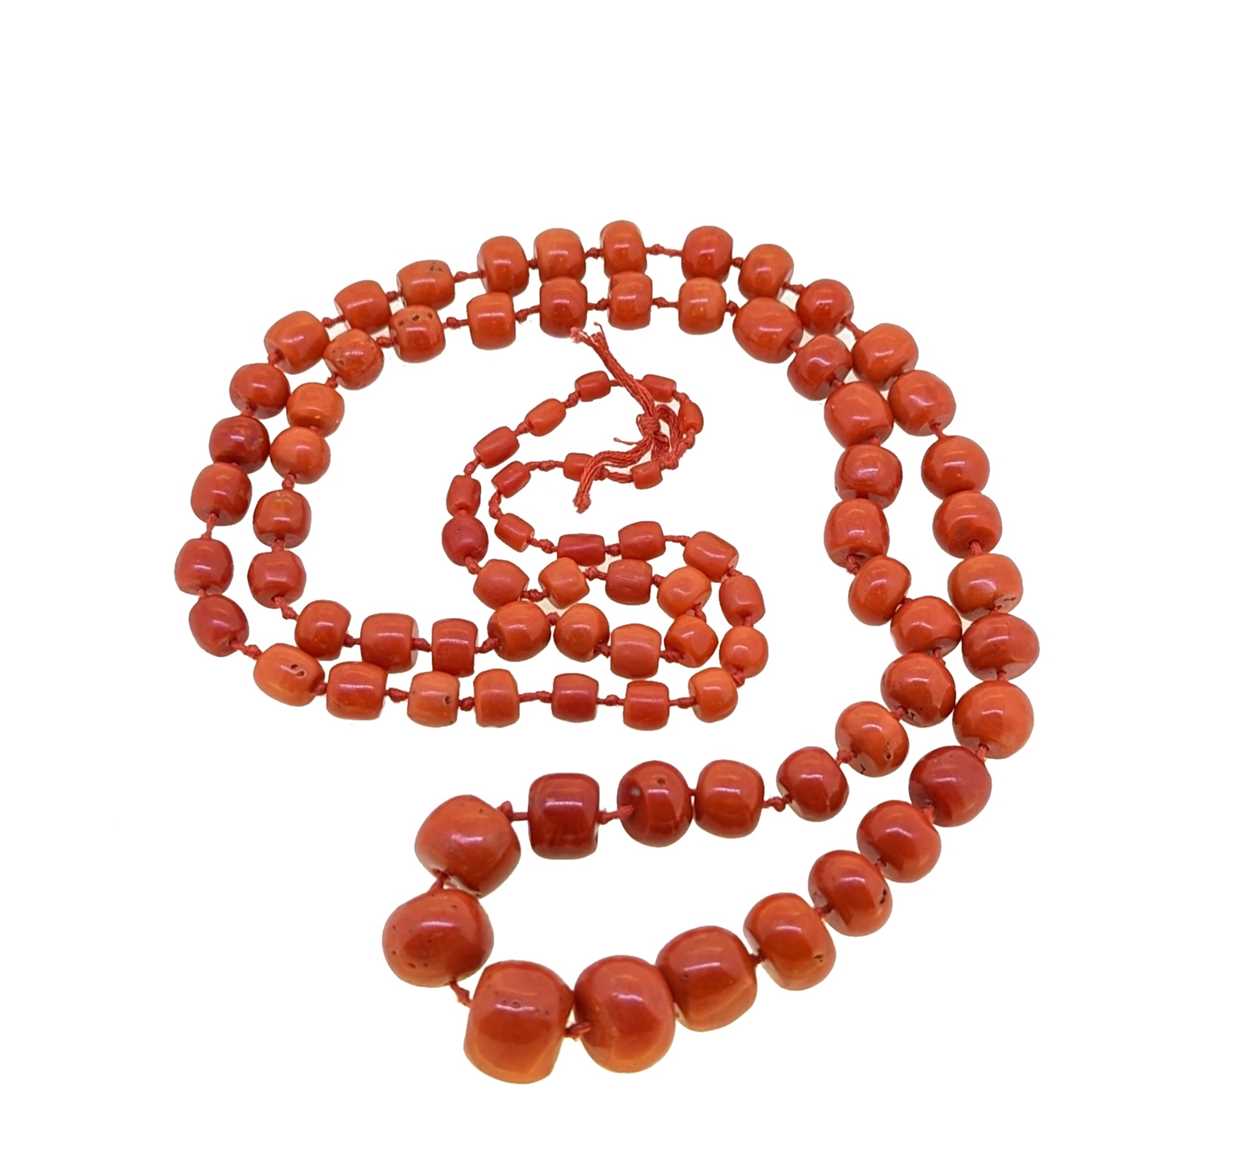 Two coral bead necklaces, - Image 2 of 3